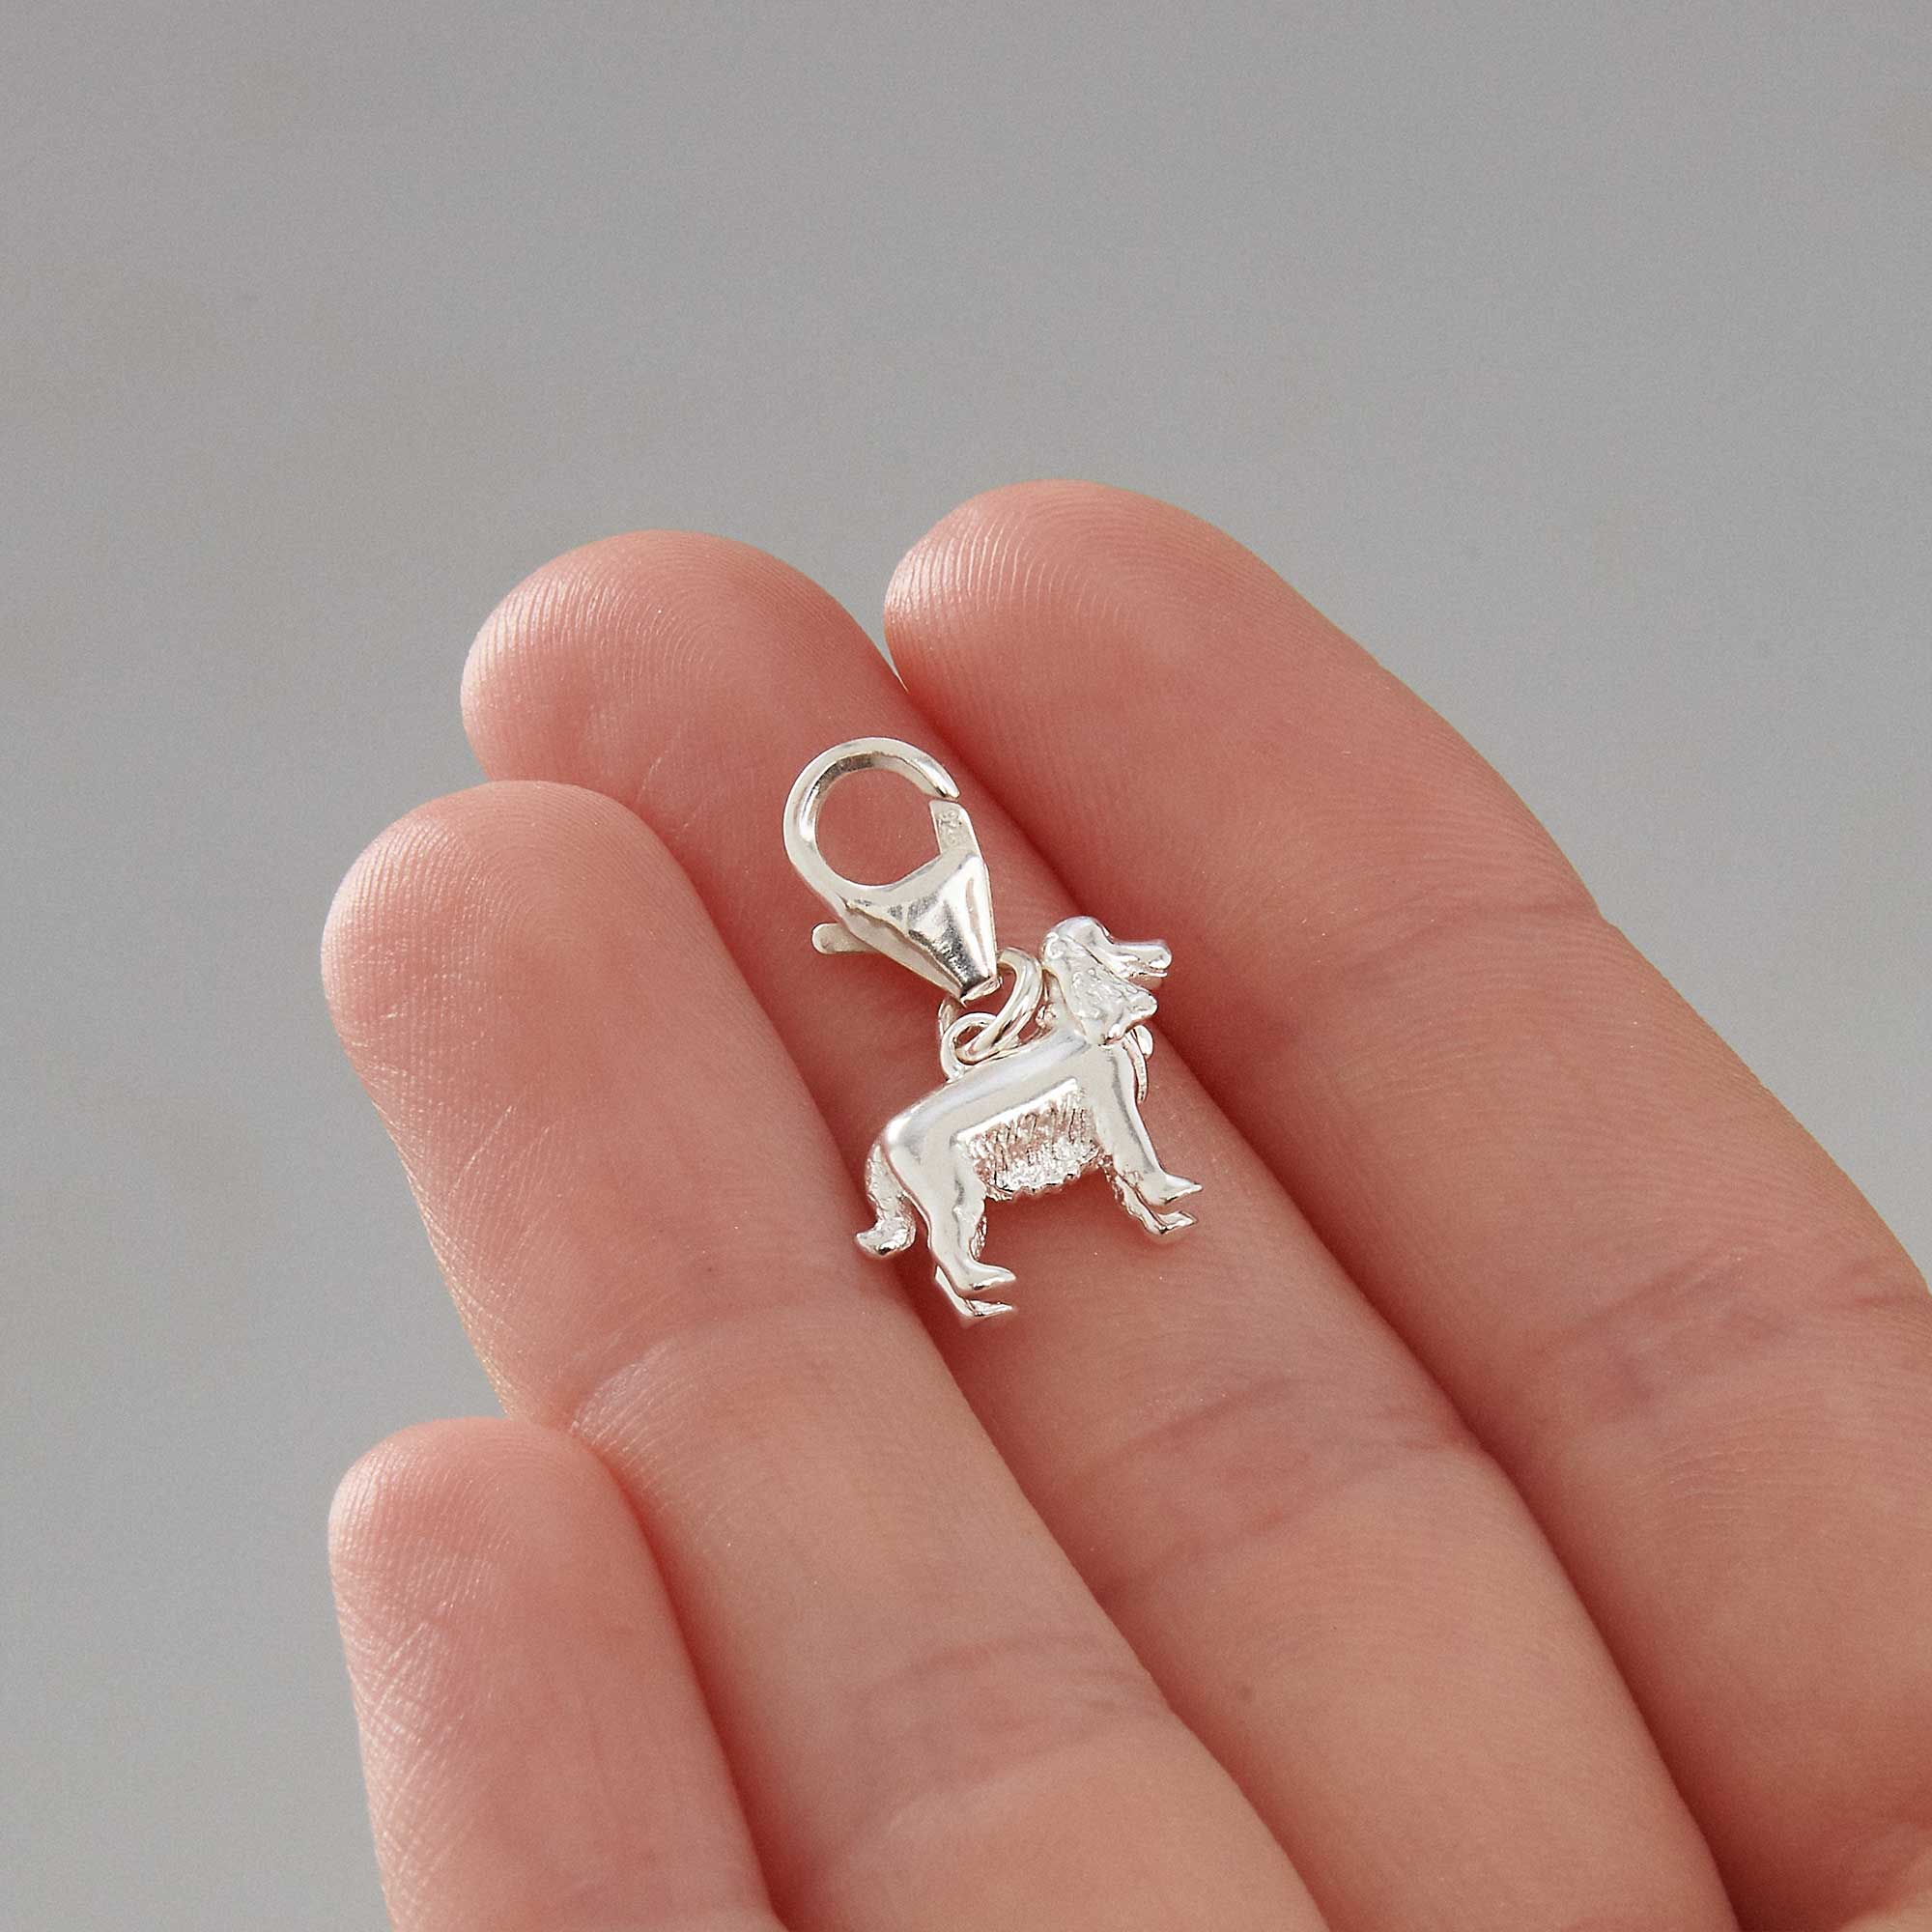 English Cocker Spaniel silver dog breed solid sterling silver dog charm with clip lobster catch Scarlett Jewellery Ltd gift for pet loss